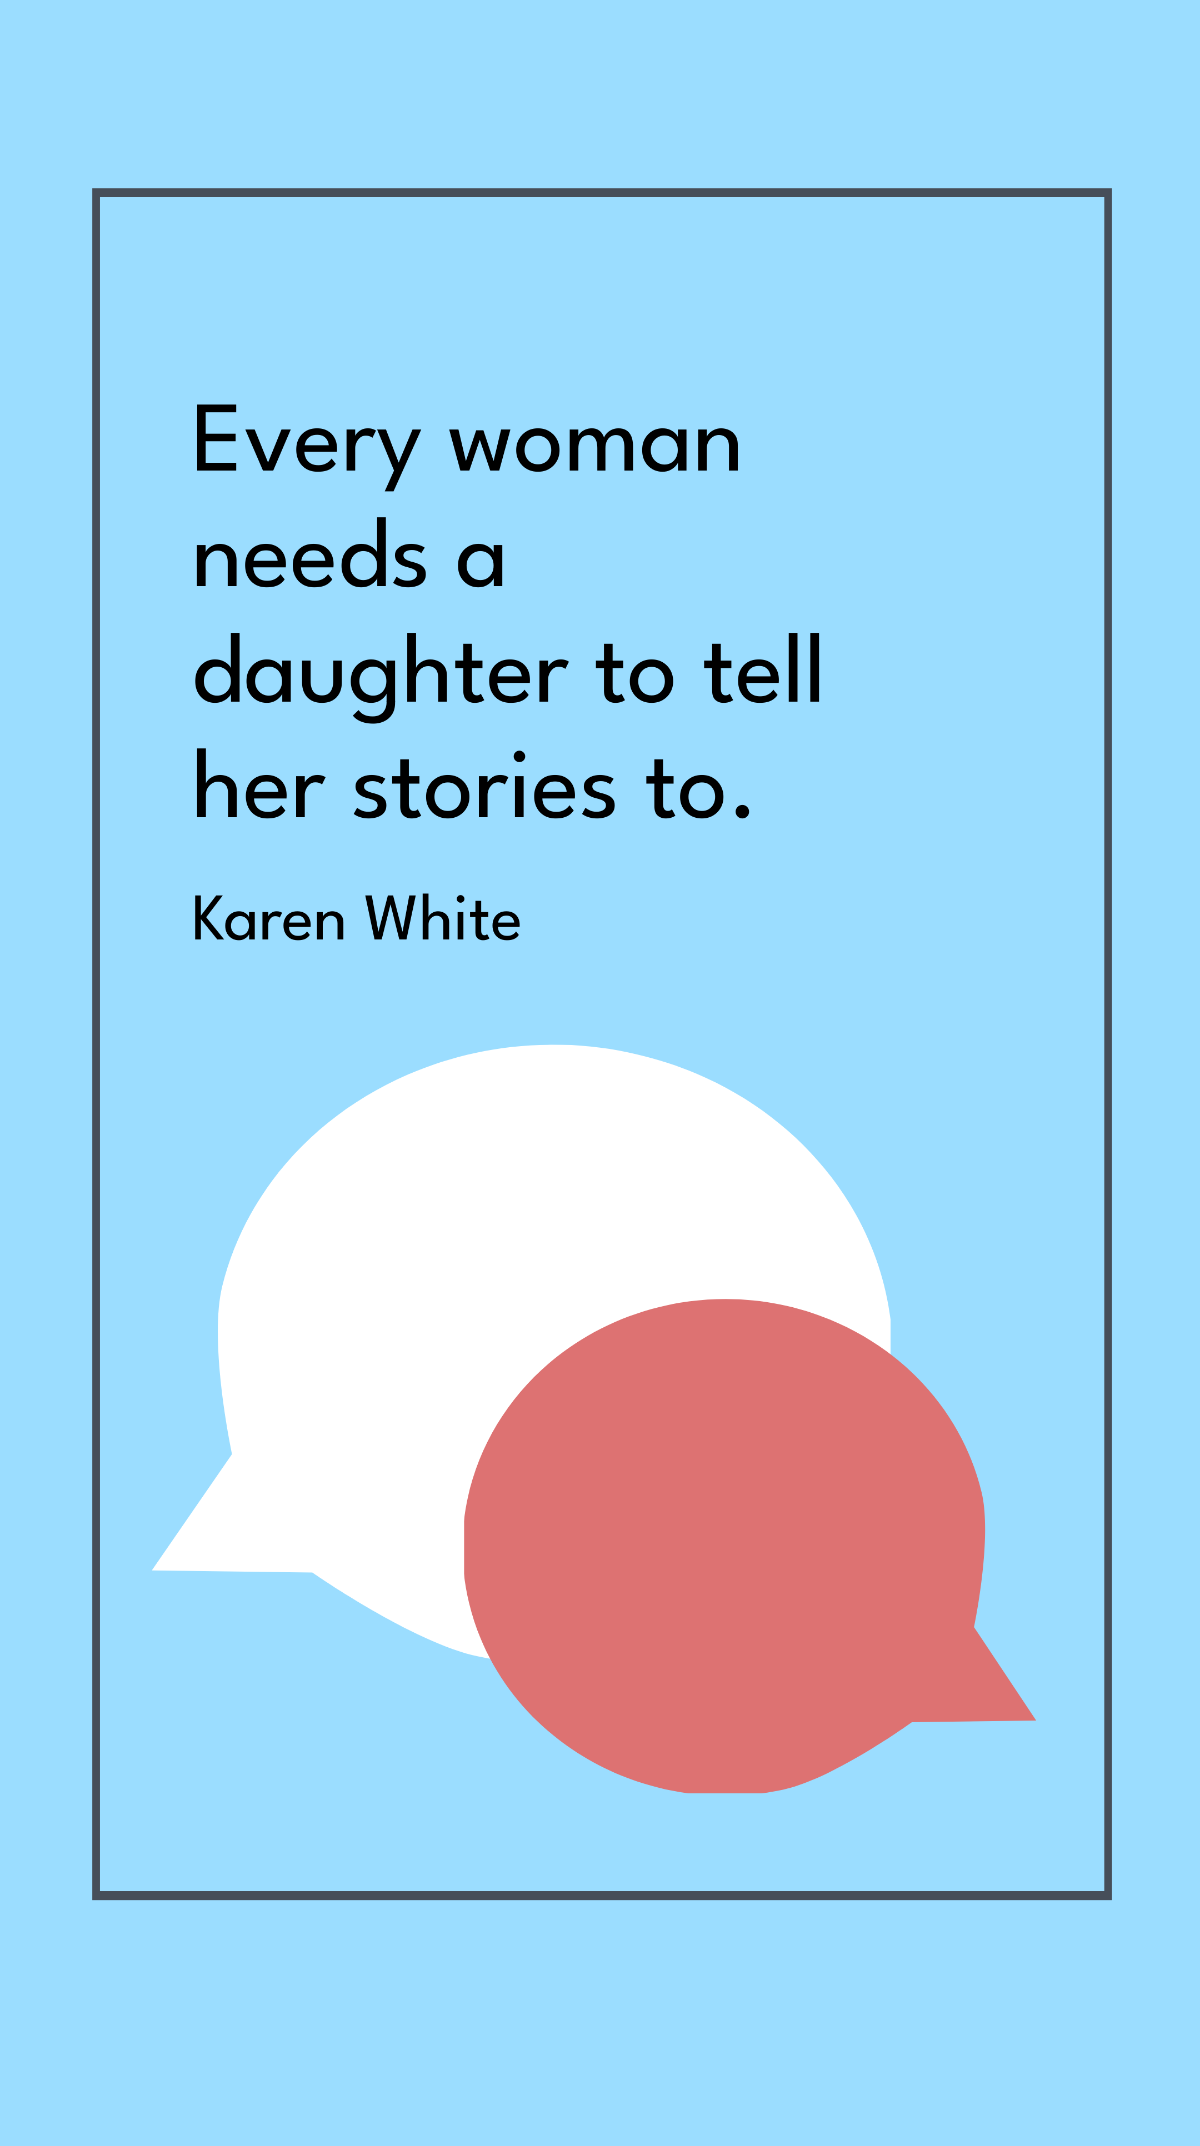 Karen White - Every woman needs a daughter to tell her stories to.